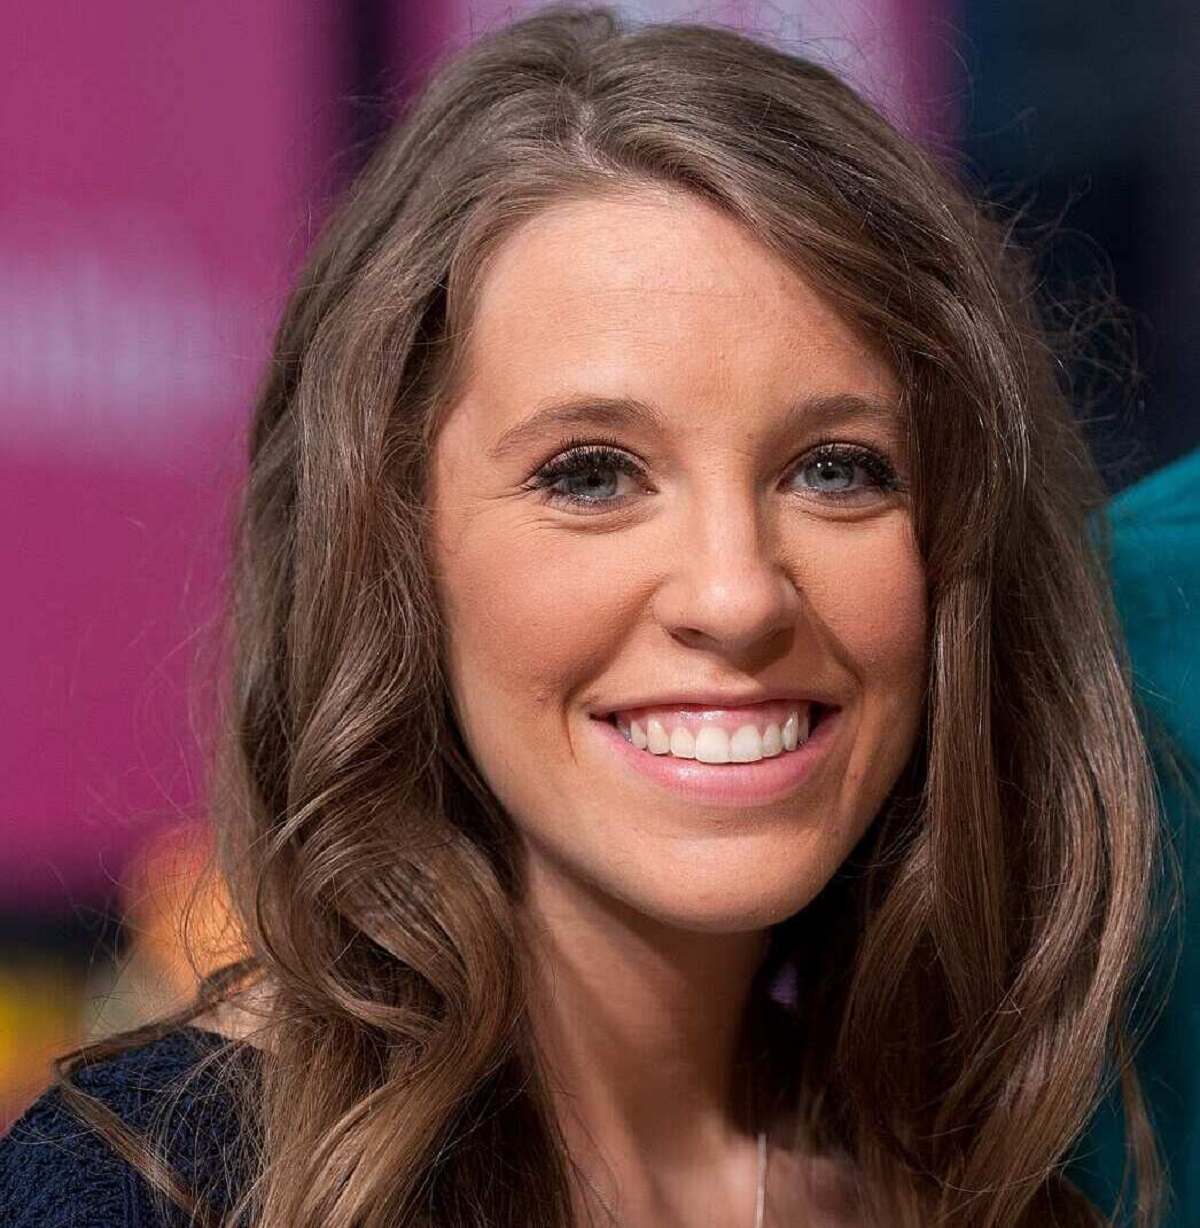 Jill Dillard appears at 'Extras' New York Studios during her time on '19 Kids and Counting'. Jill Dillard is mostly estranged from the Duggar family